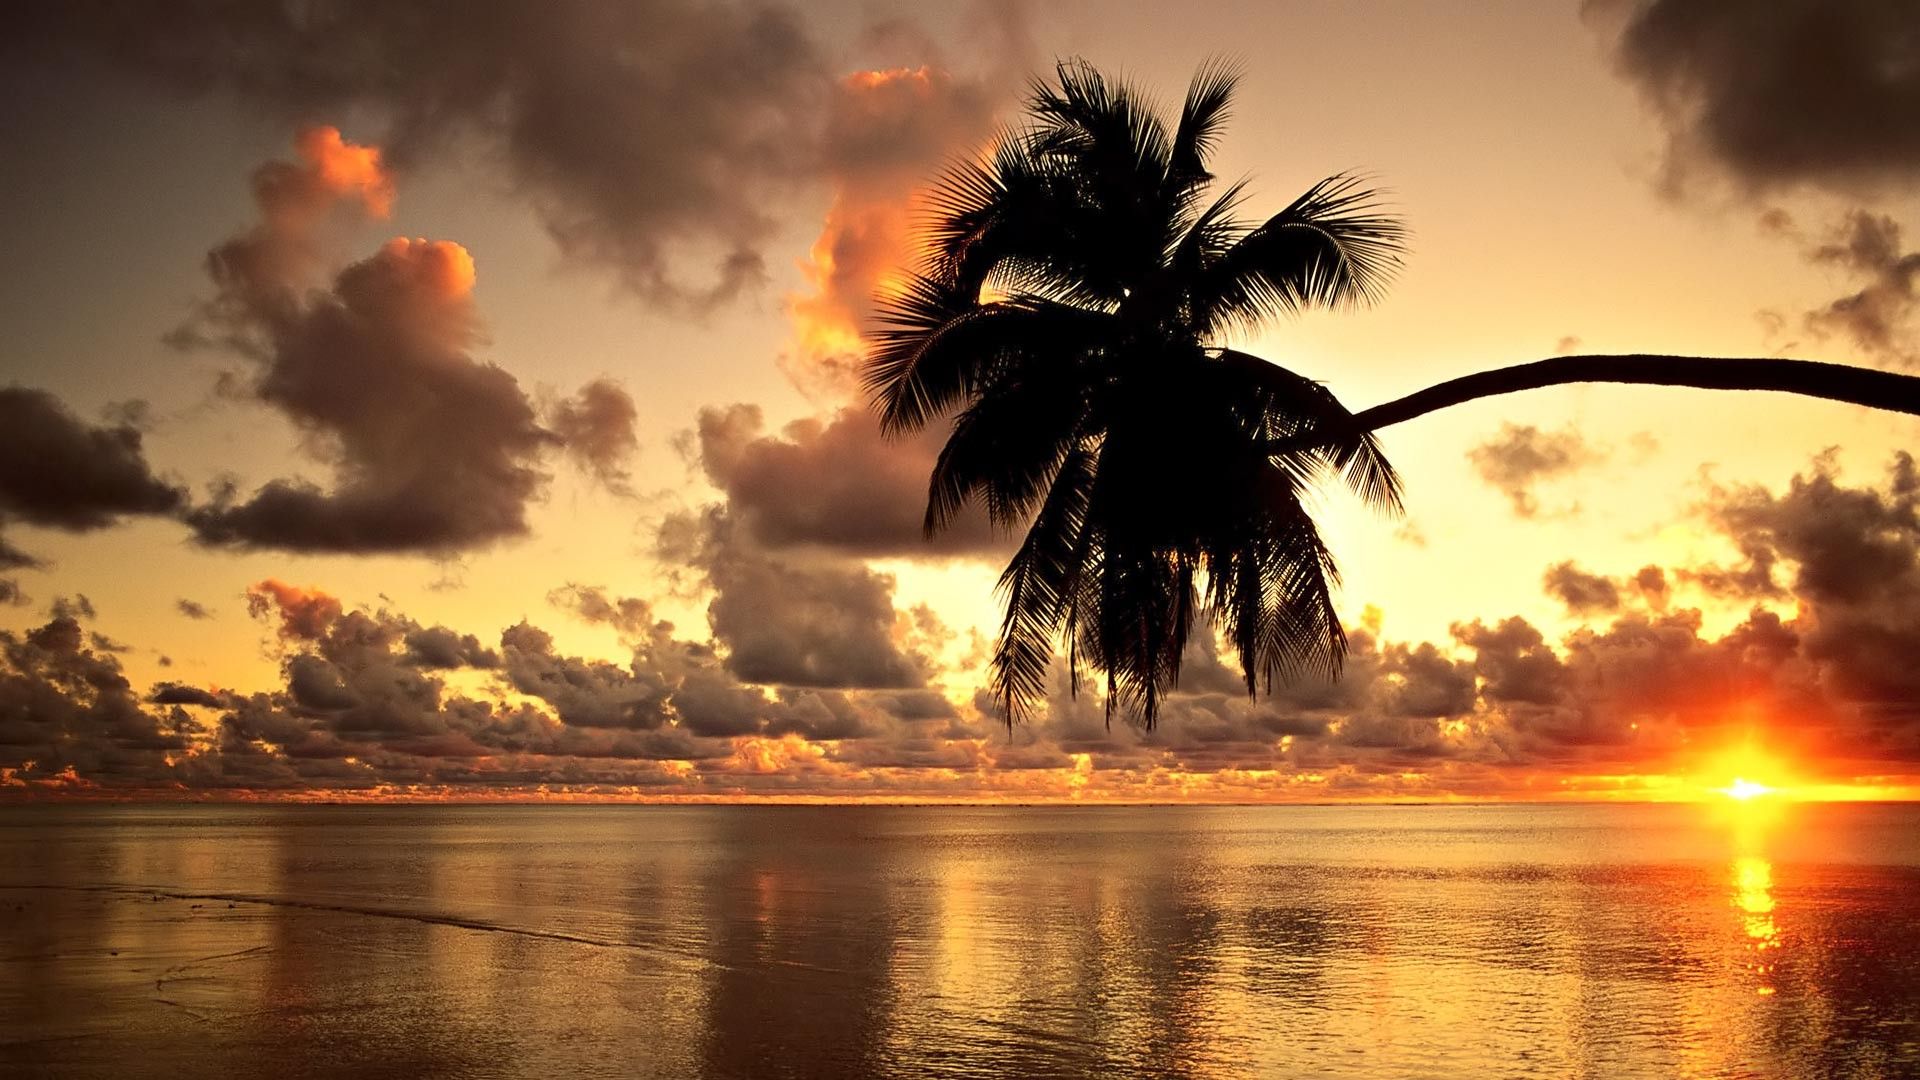 Ocean Sunset With Palm Trees - wallpaper